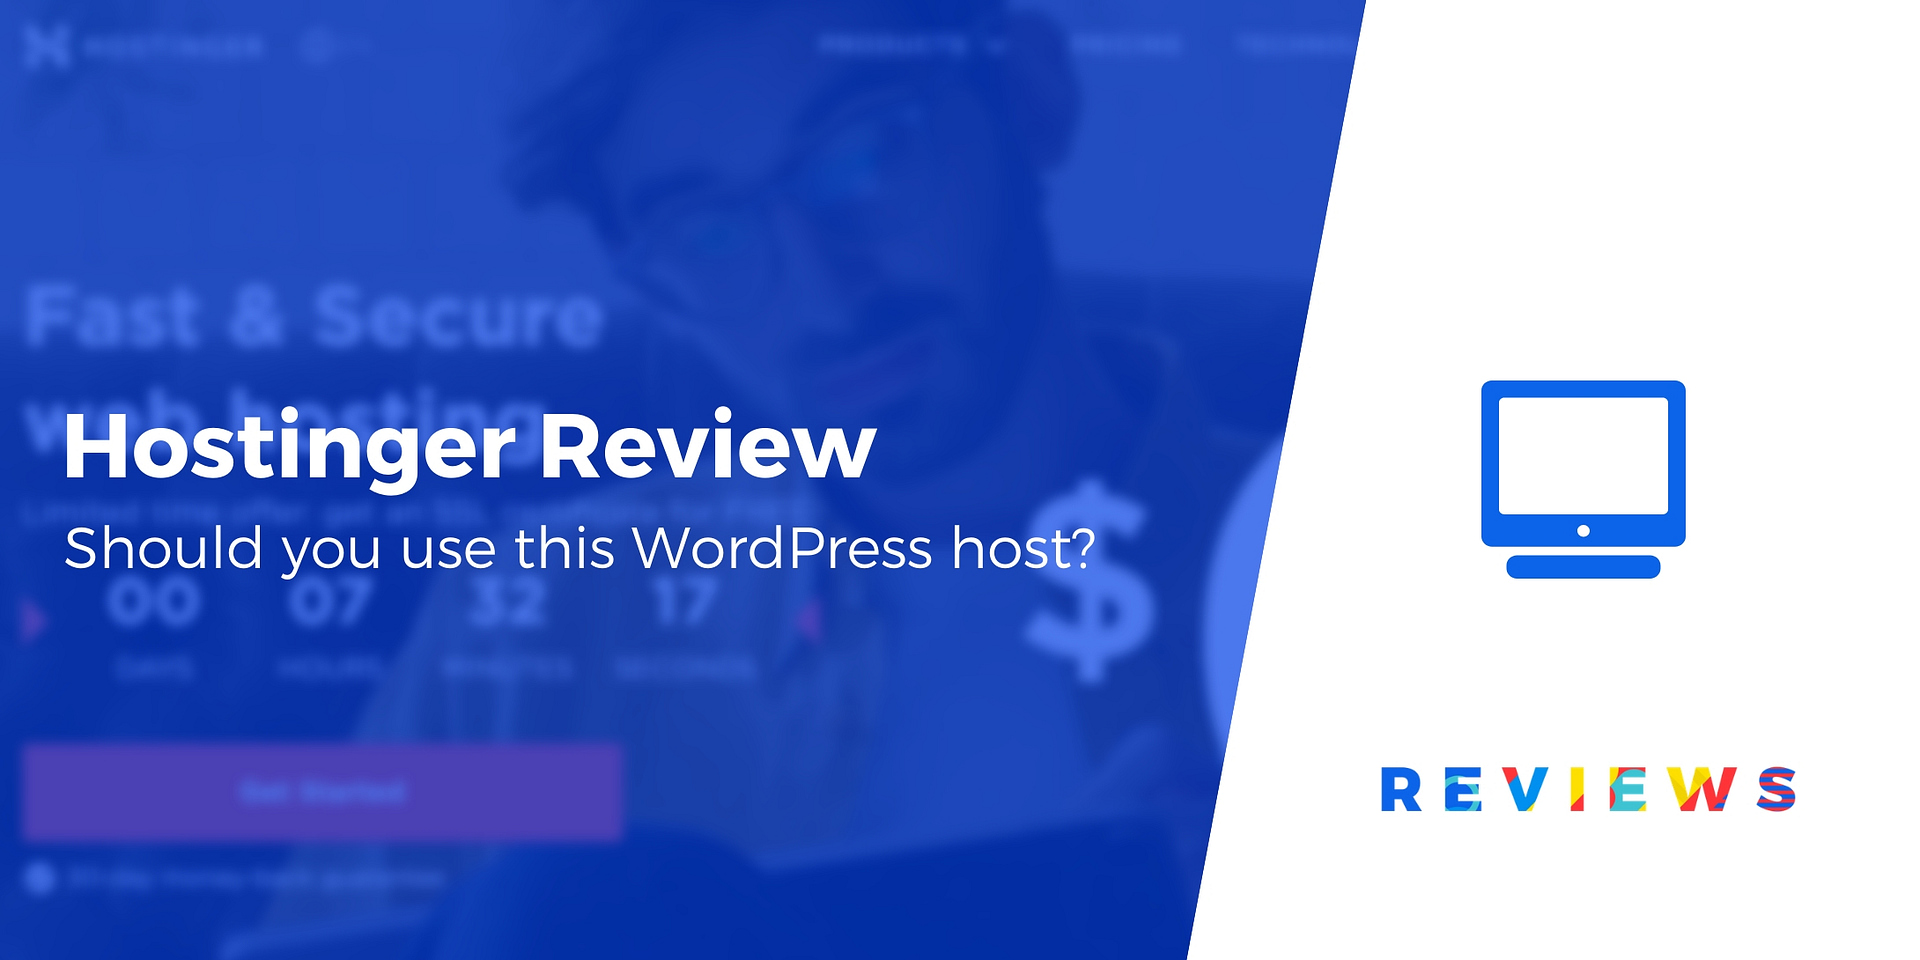 Hostinger Review For Wordpress Is It A Good Option For You Images, Photos, Reviews